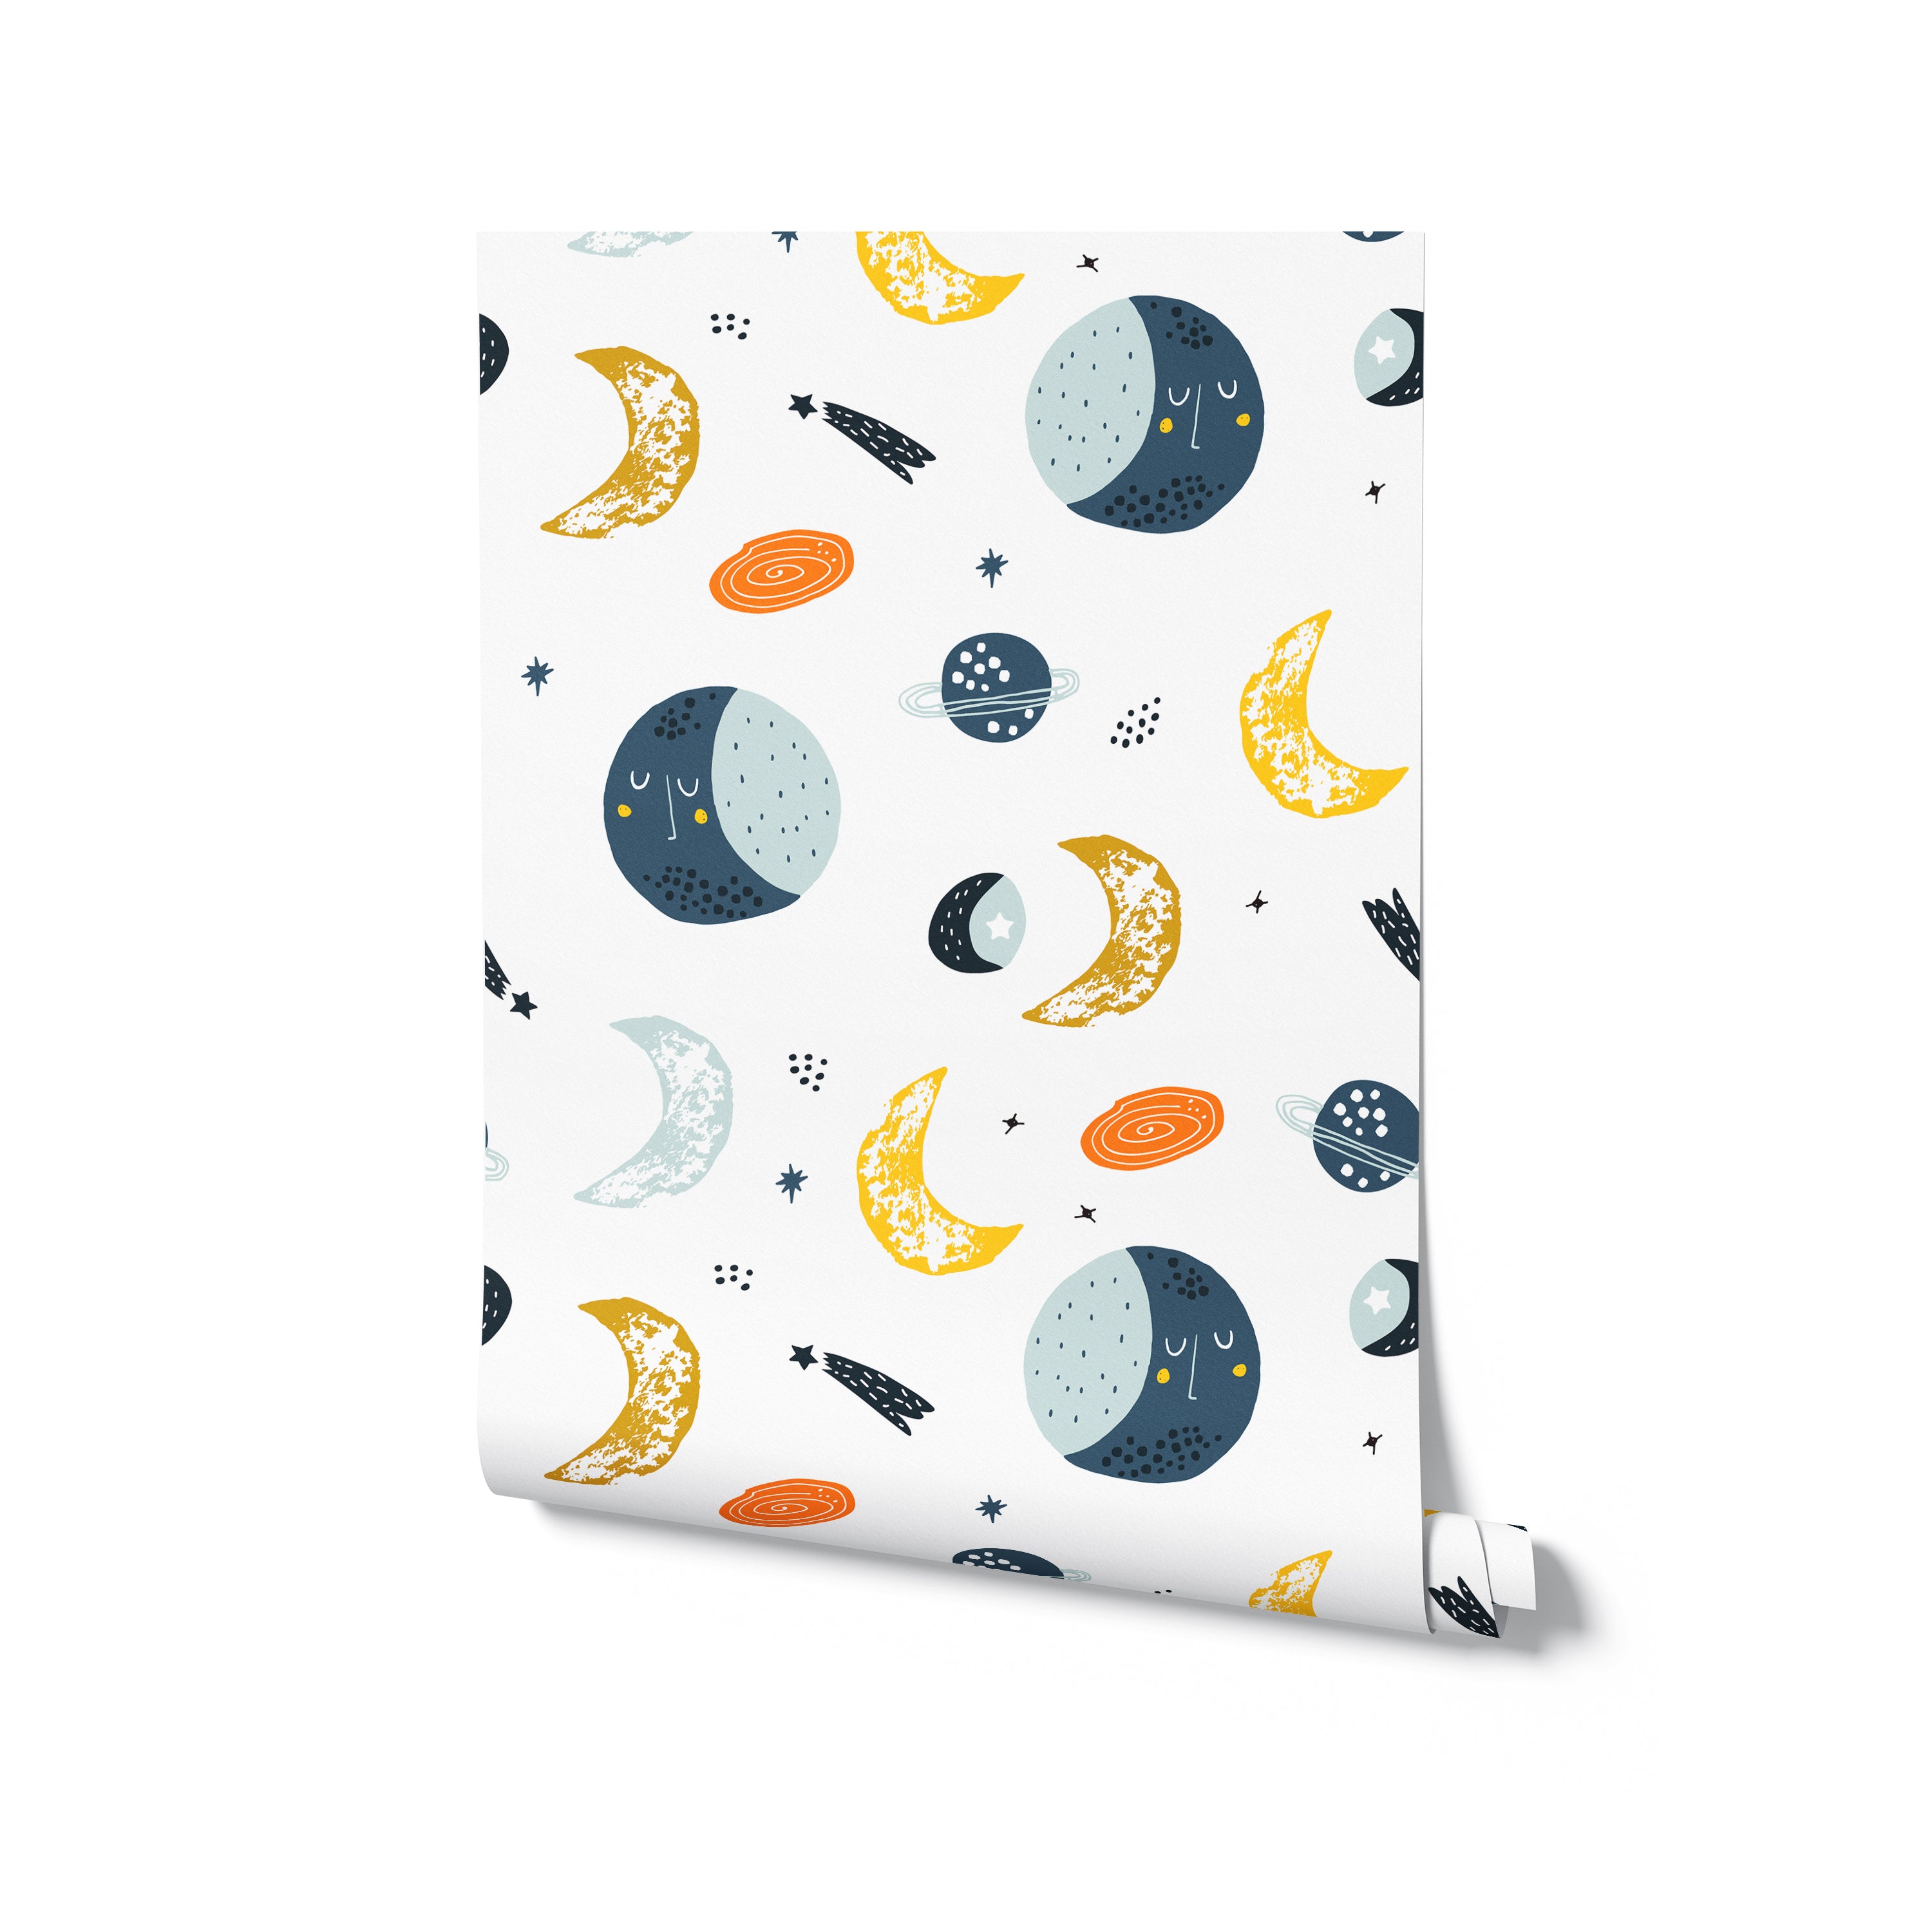 A close-up of the celestial-themed wallpaper, showcasing playful illustrations of various celestial elements like moons, stars, and planets, set against a light background. The pattern is lively and whimsical, perfect for a child's room.